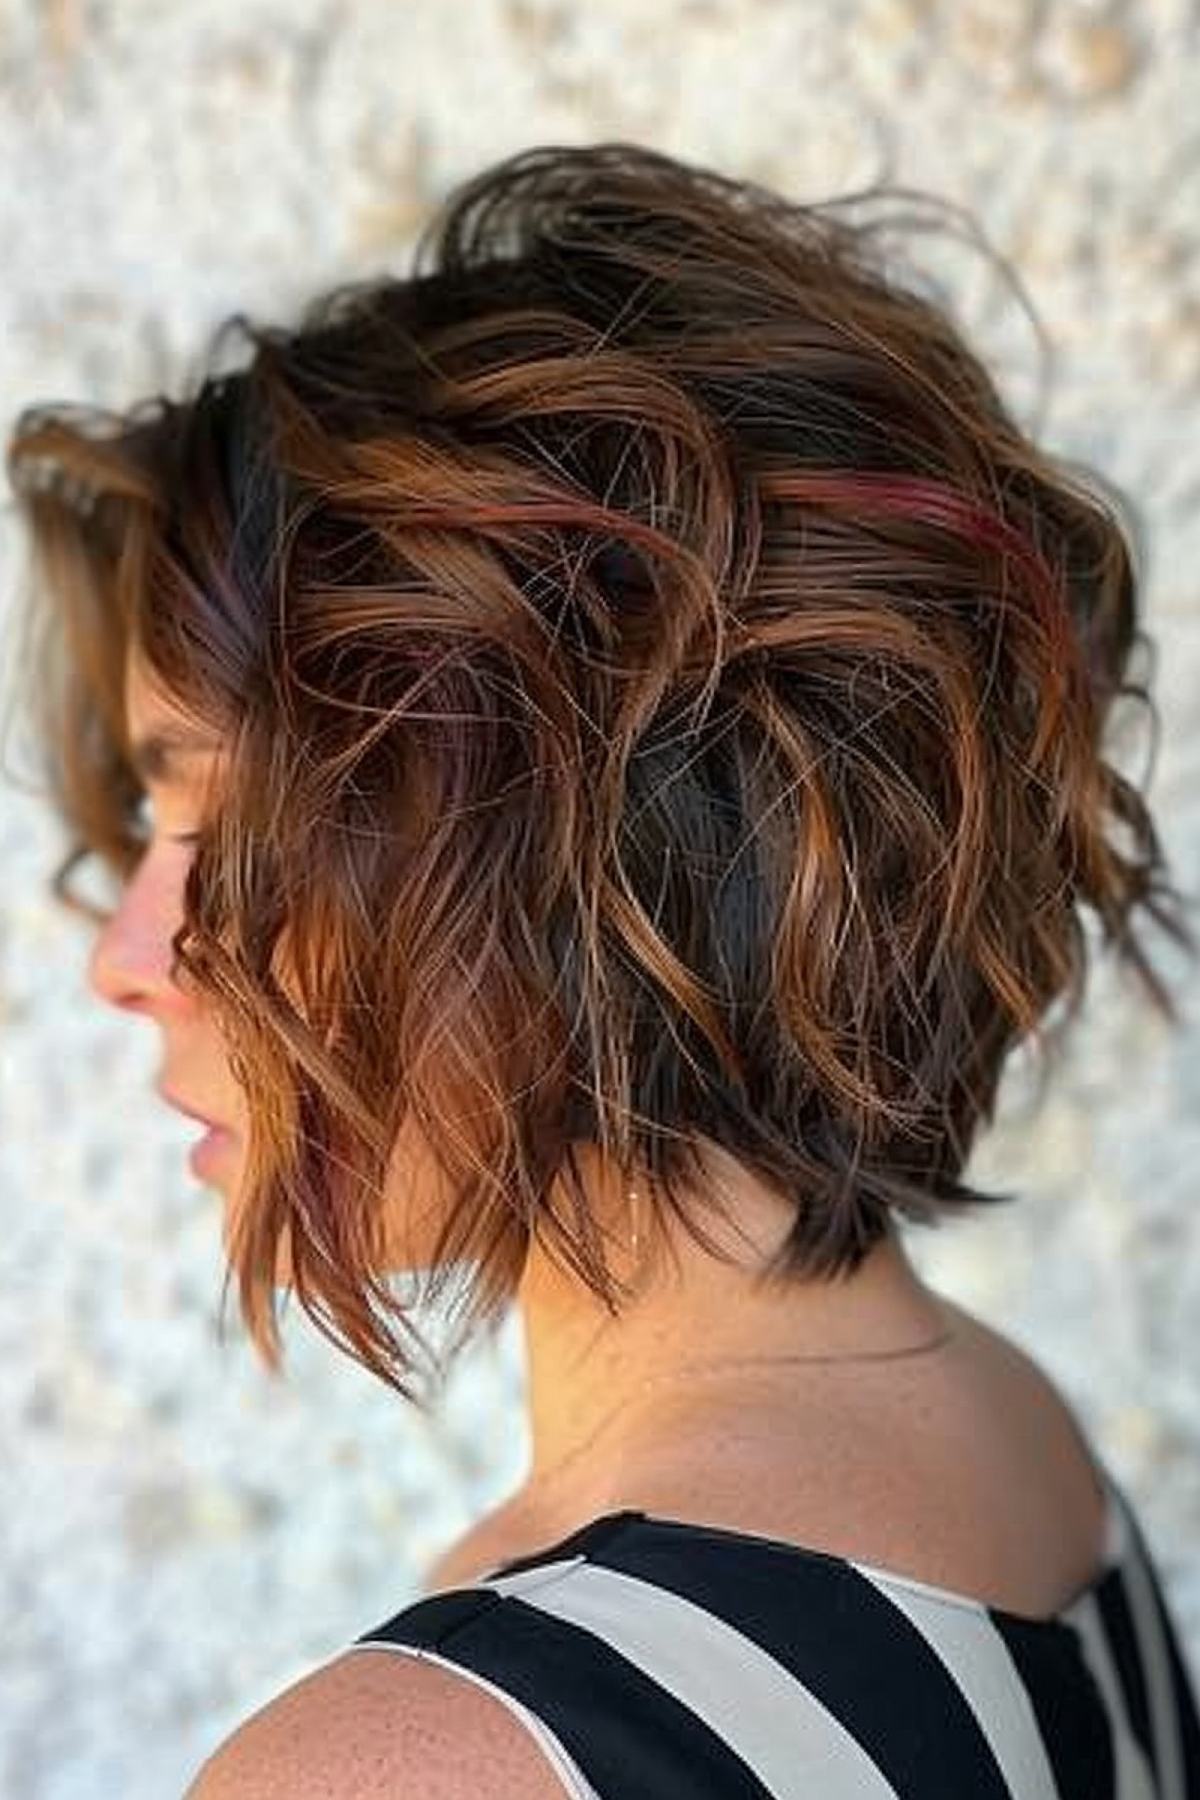 Short stacked bob with red highlights and textured layers